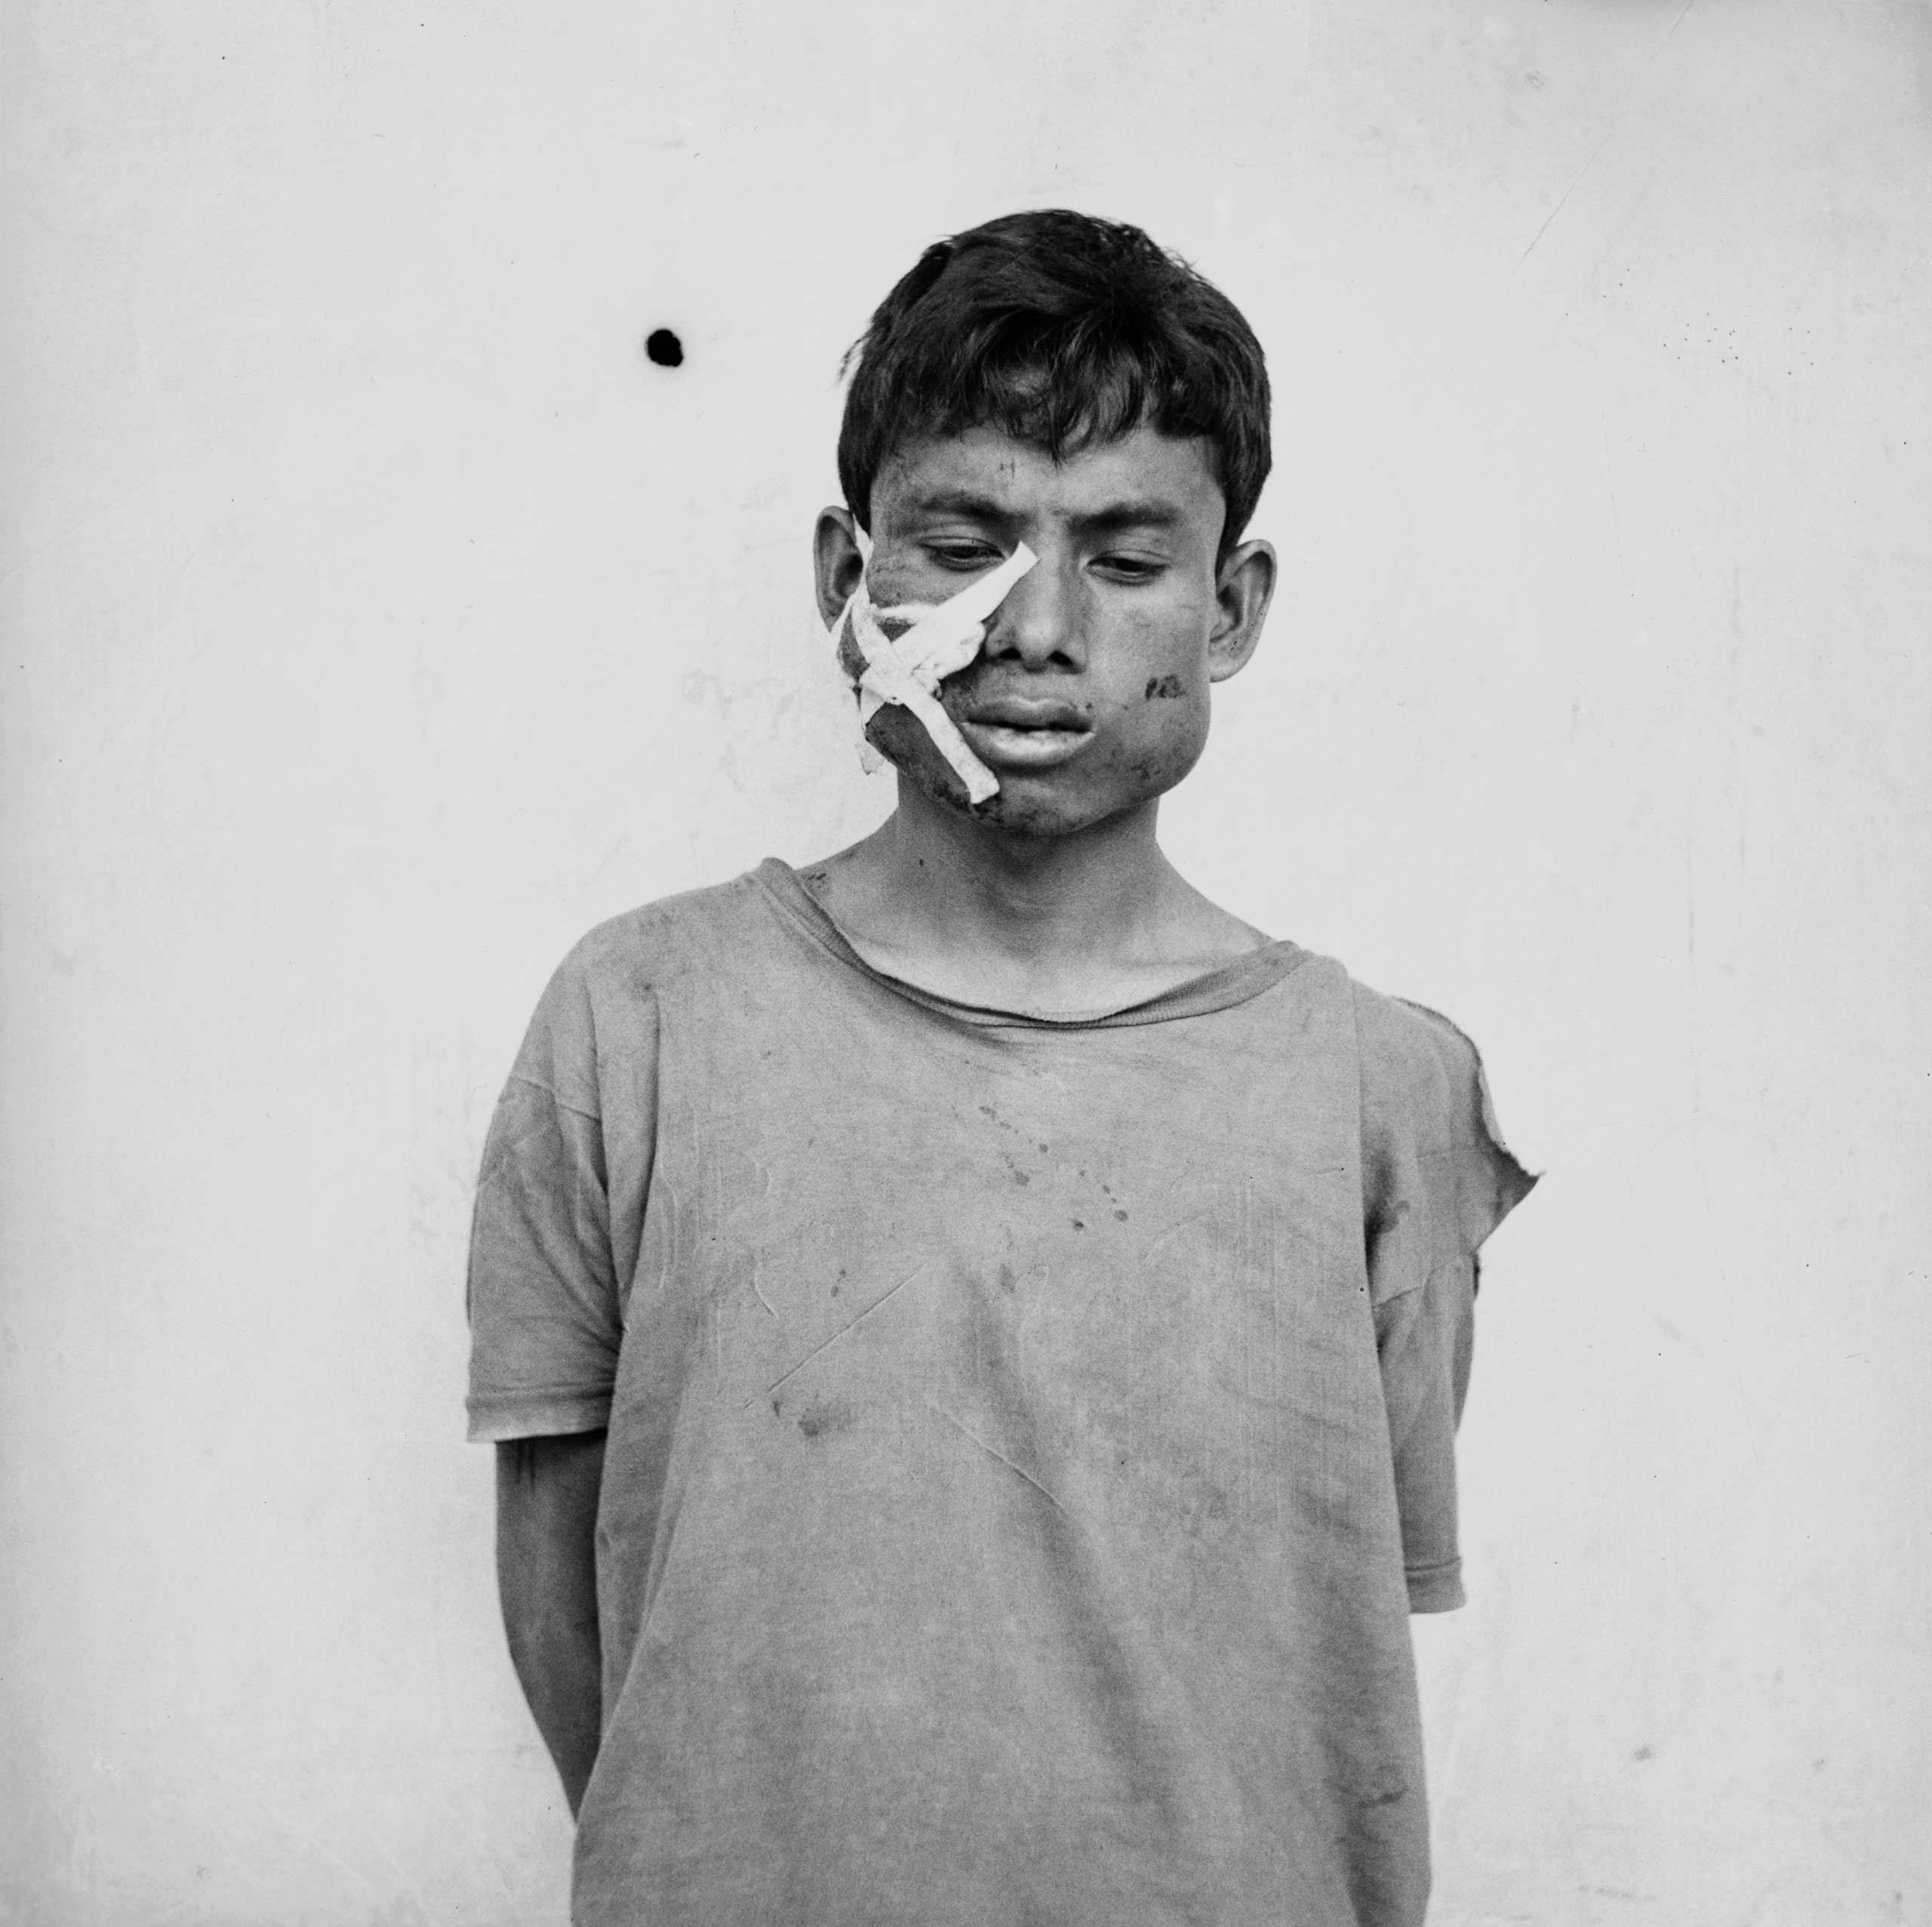 An unidentified prisoner suspected of crimes against Pol Pot's regime photographed while being checked in at the S-21 death camp in Cambodia, c. 1975-78.